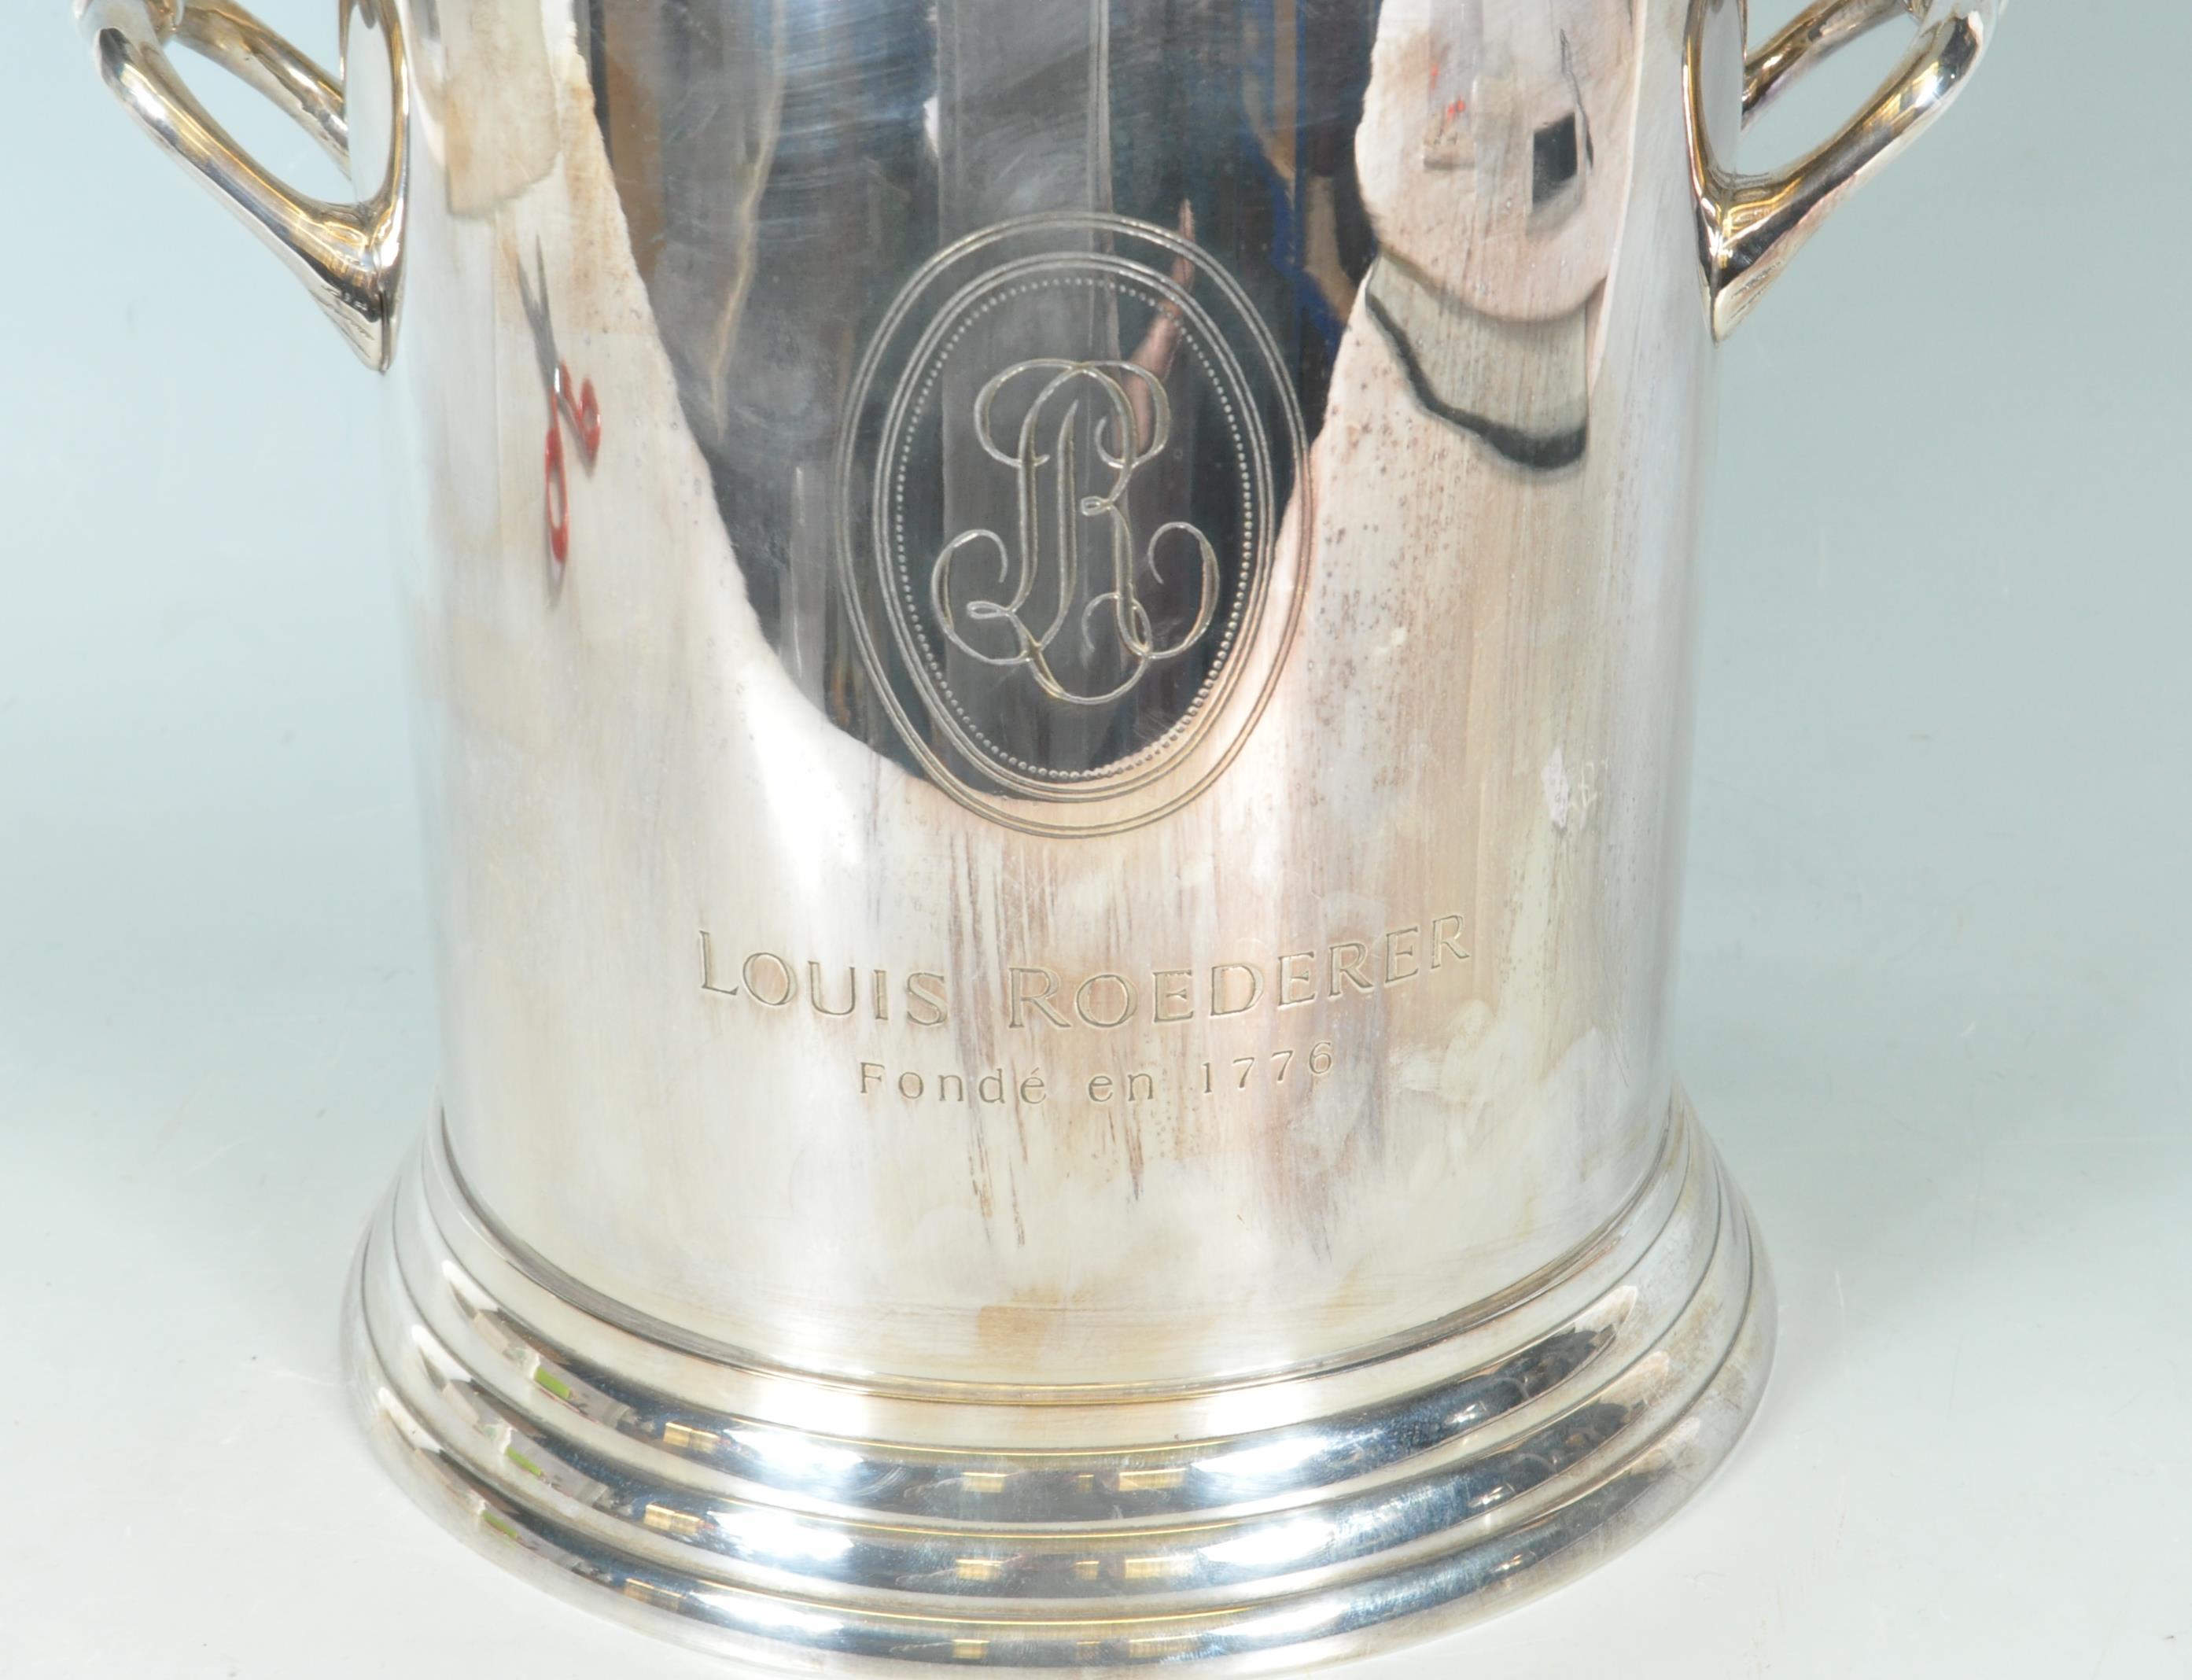 20TH CENTURY LOUIS ROEDERER CHAMPAGNE ICE BUCKET - Image 2 of 7